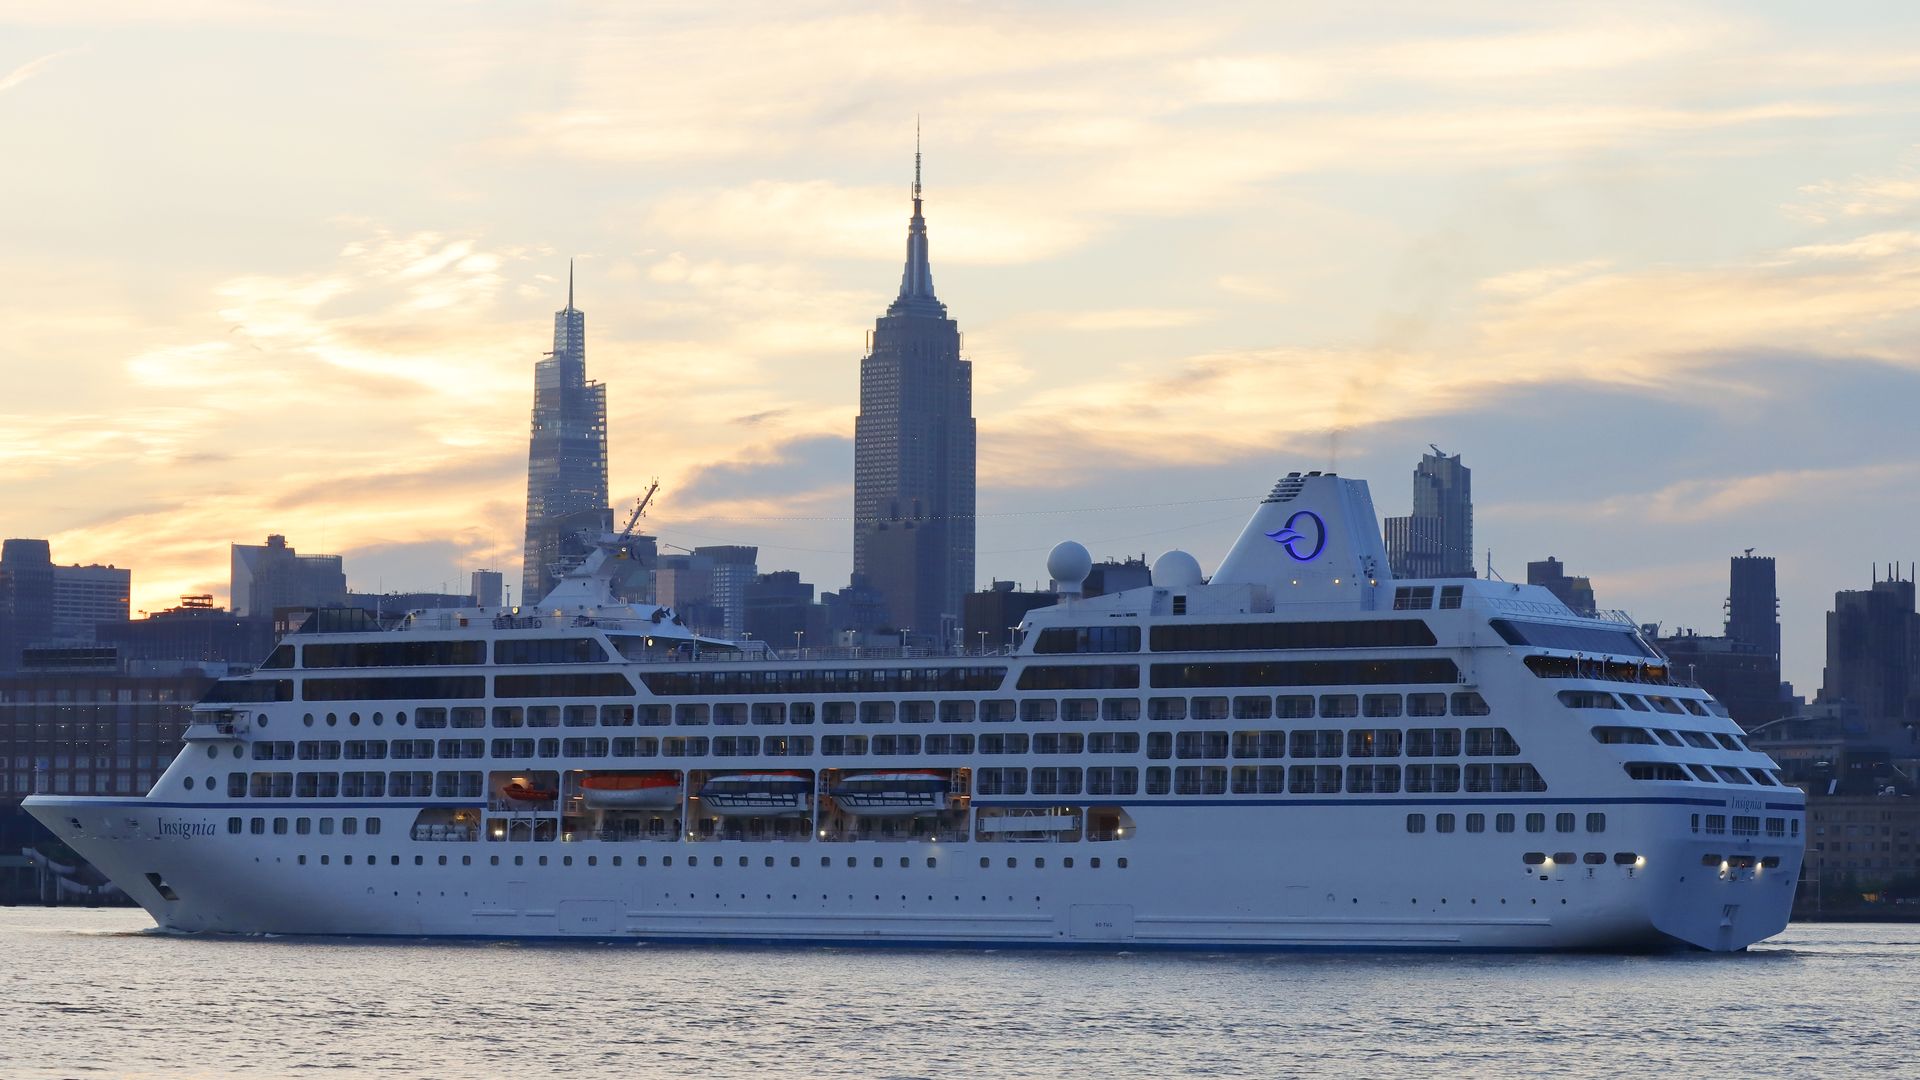  The Insignia cruise ship owned by Oceania Cruises sails in the Hudson River past the skyline of Manhattan in New York City as it returns to port at sunrise on July 19.